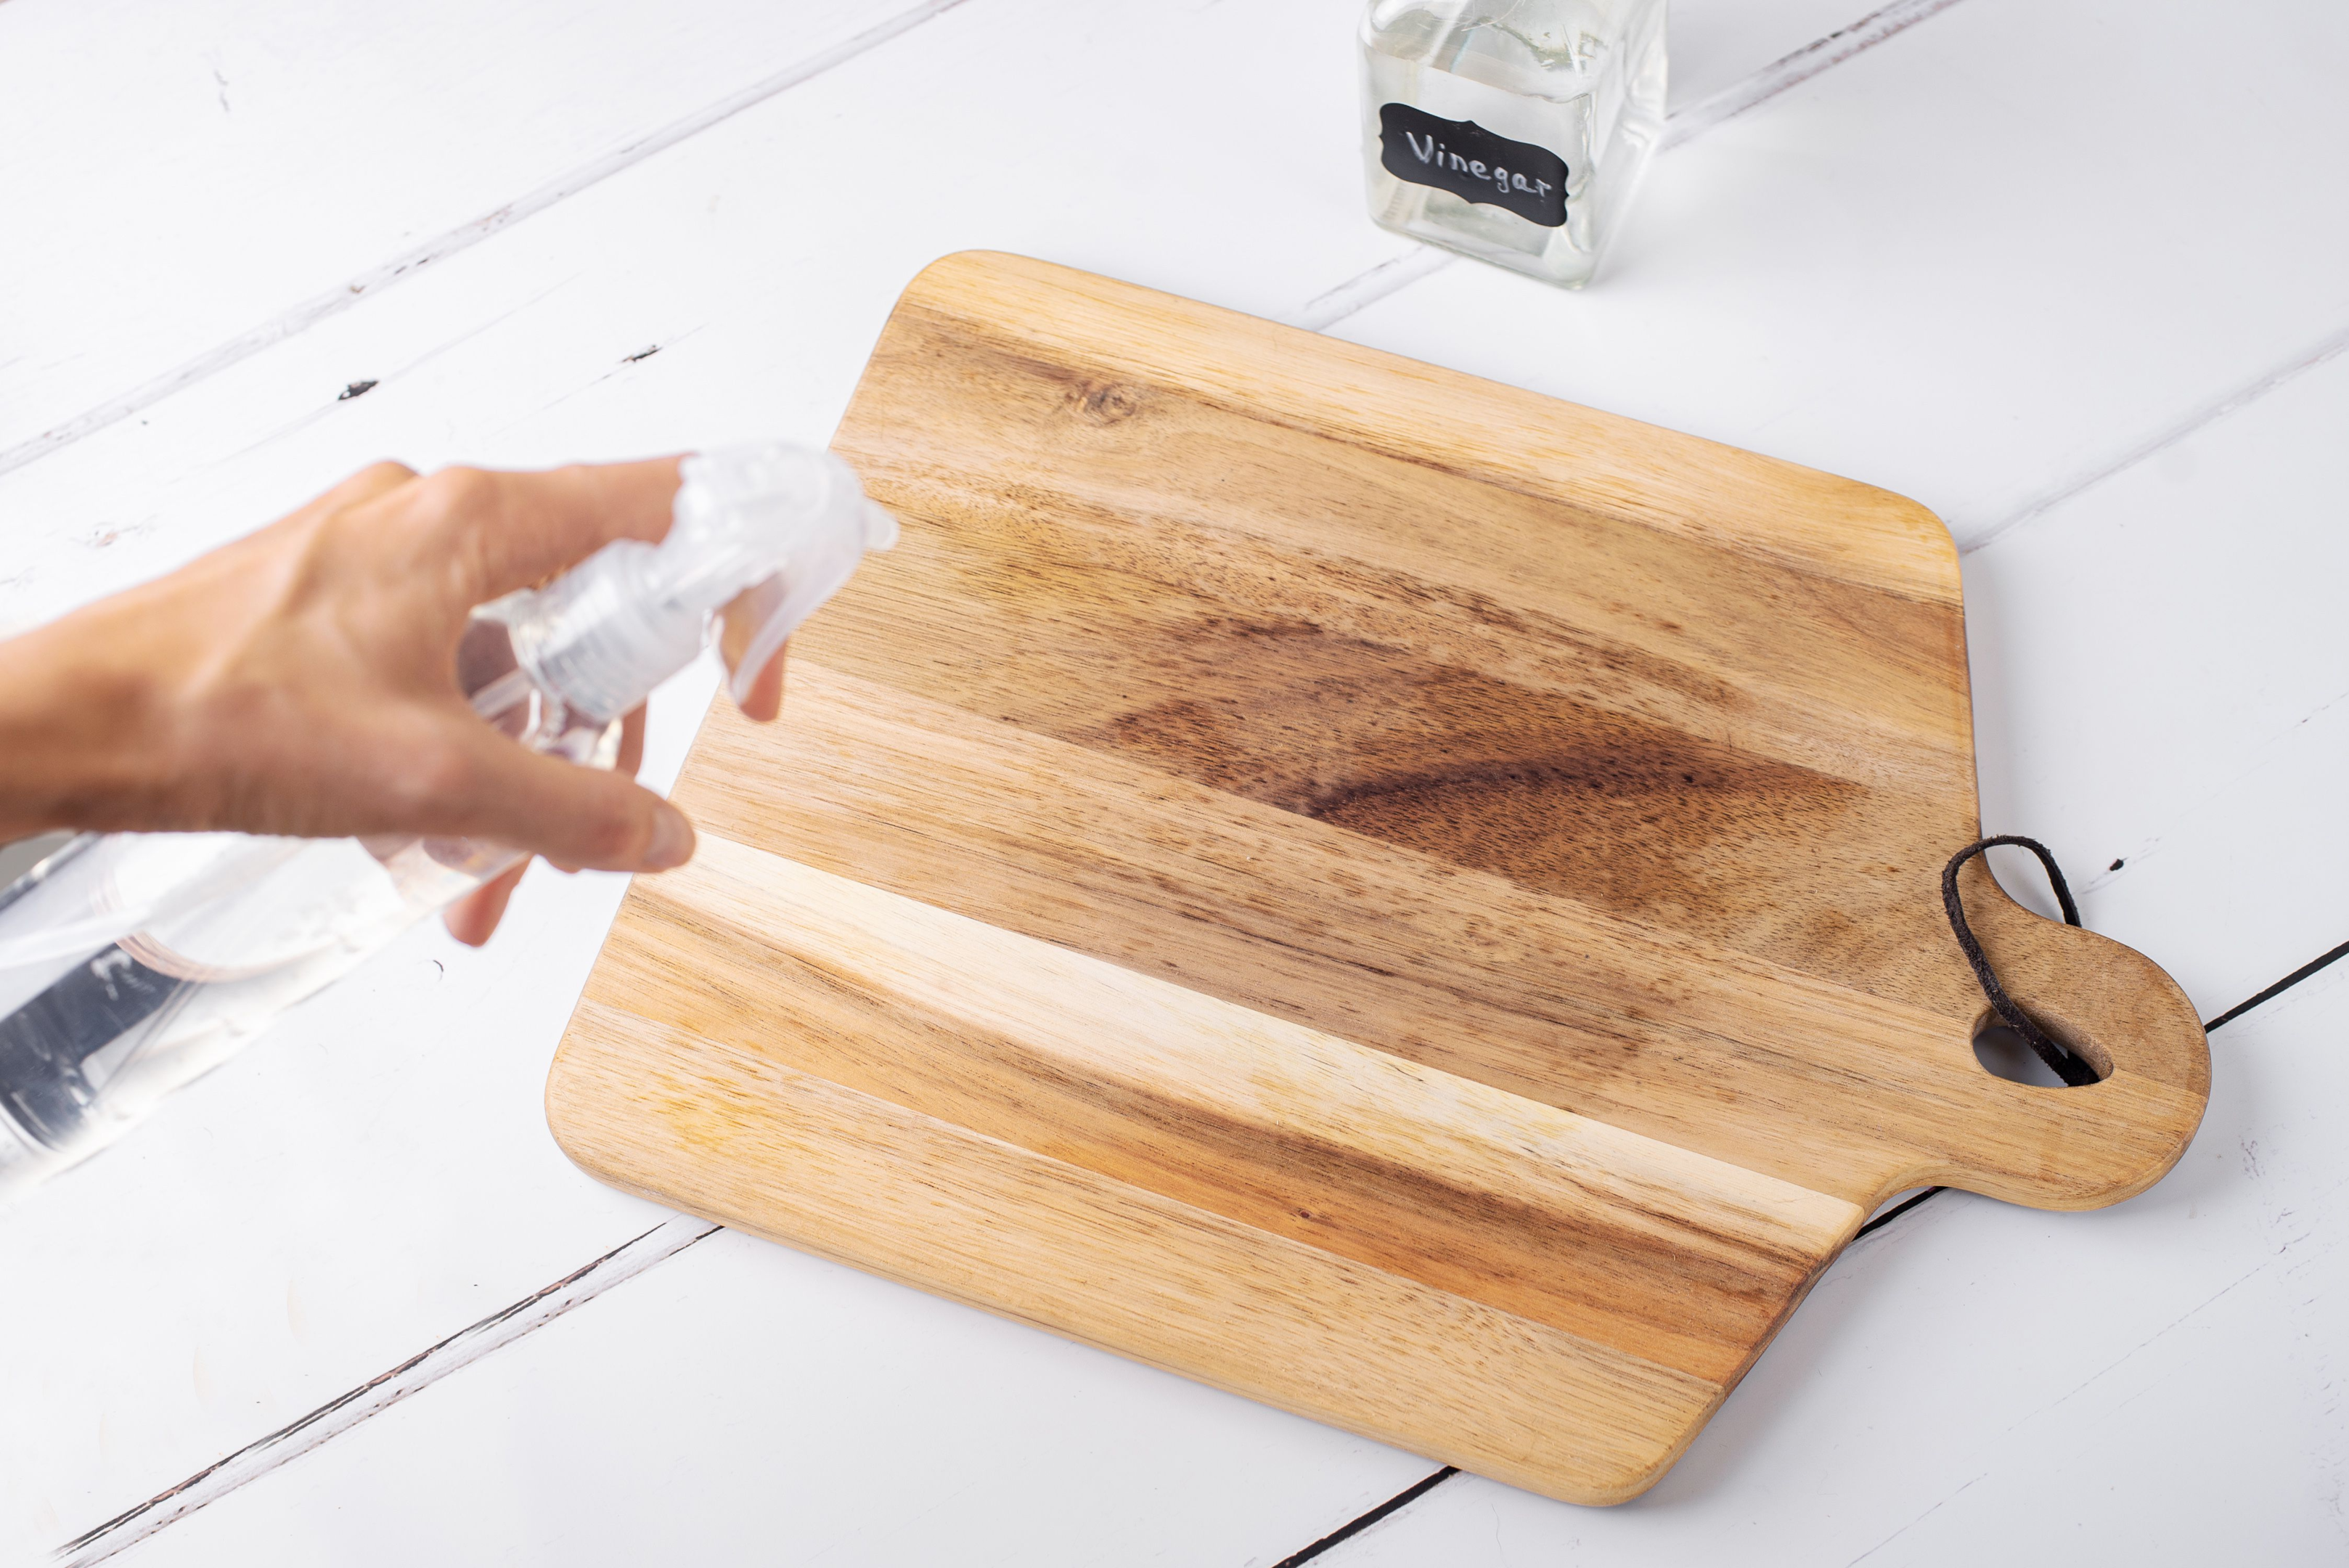 How to Clean a Wooden Cutting Board: Simple Steps for a Safe Board